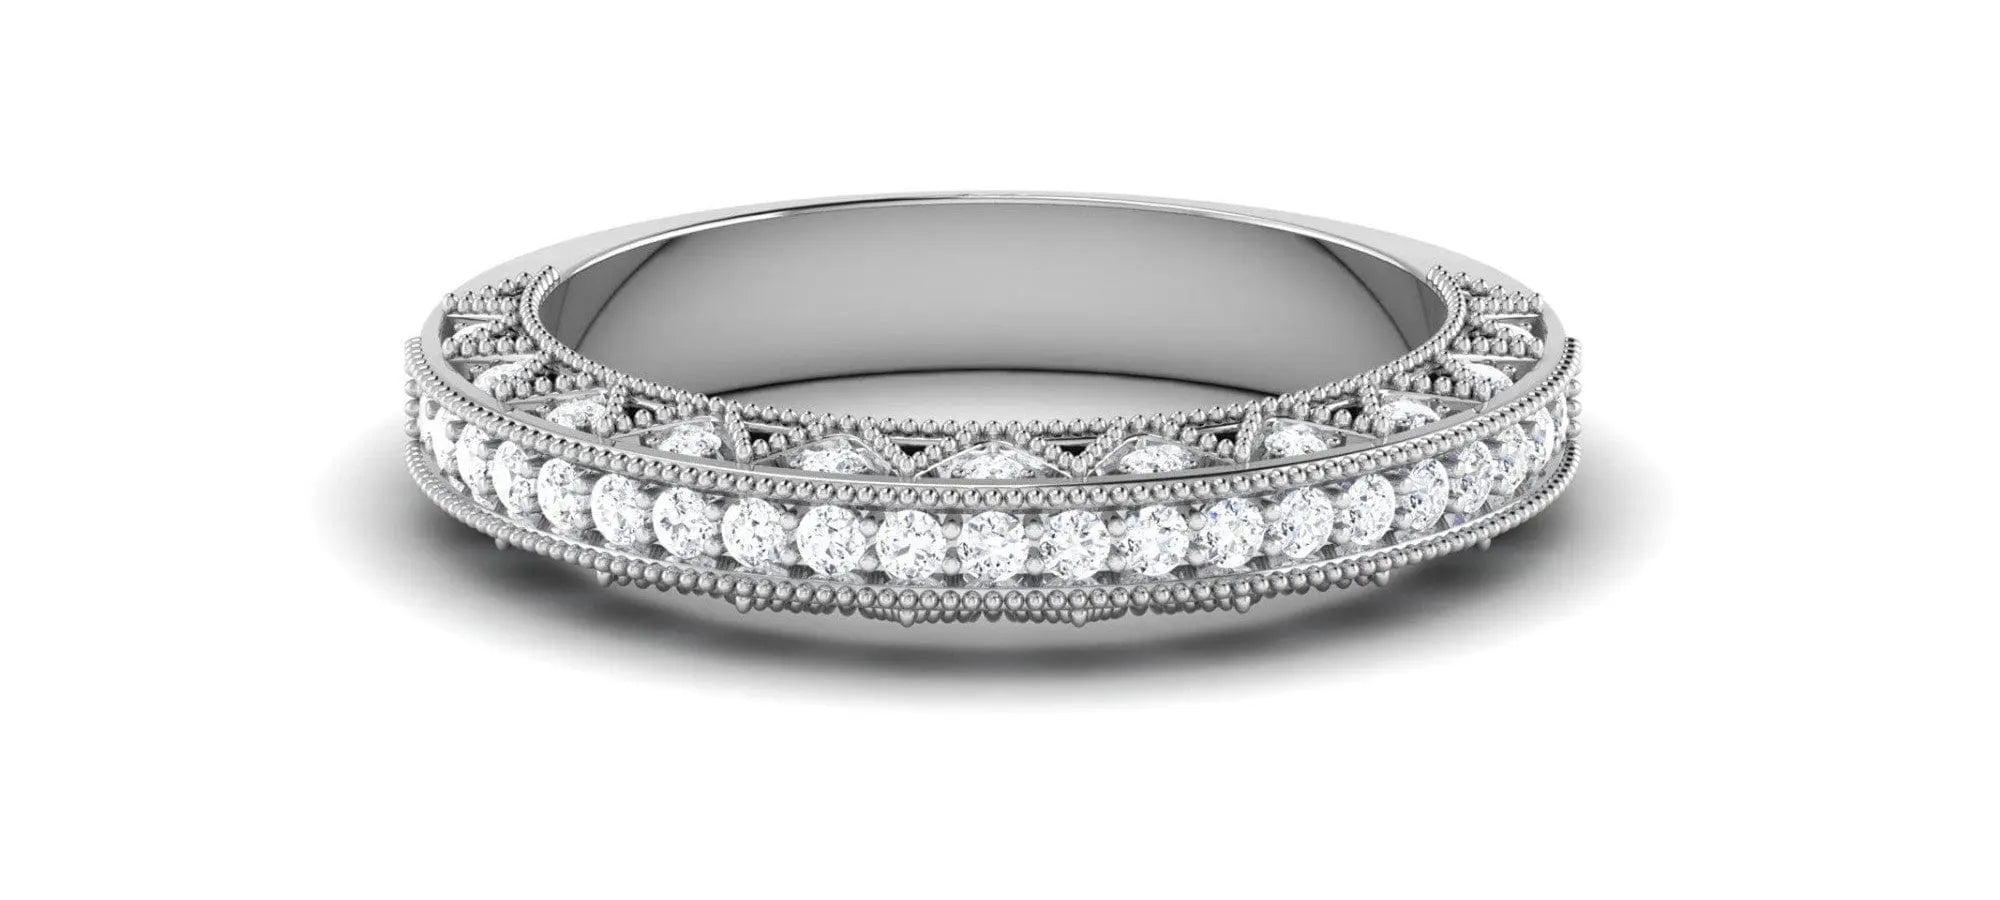 Mangal Parinay - Essential Tips To Buy An Exquisite Engagement Ring...